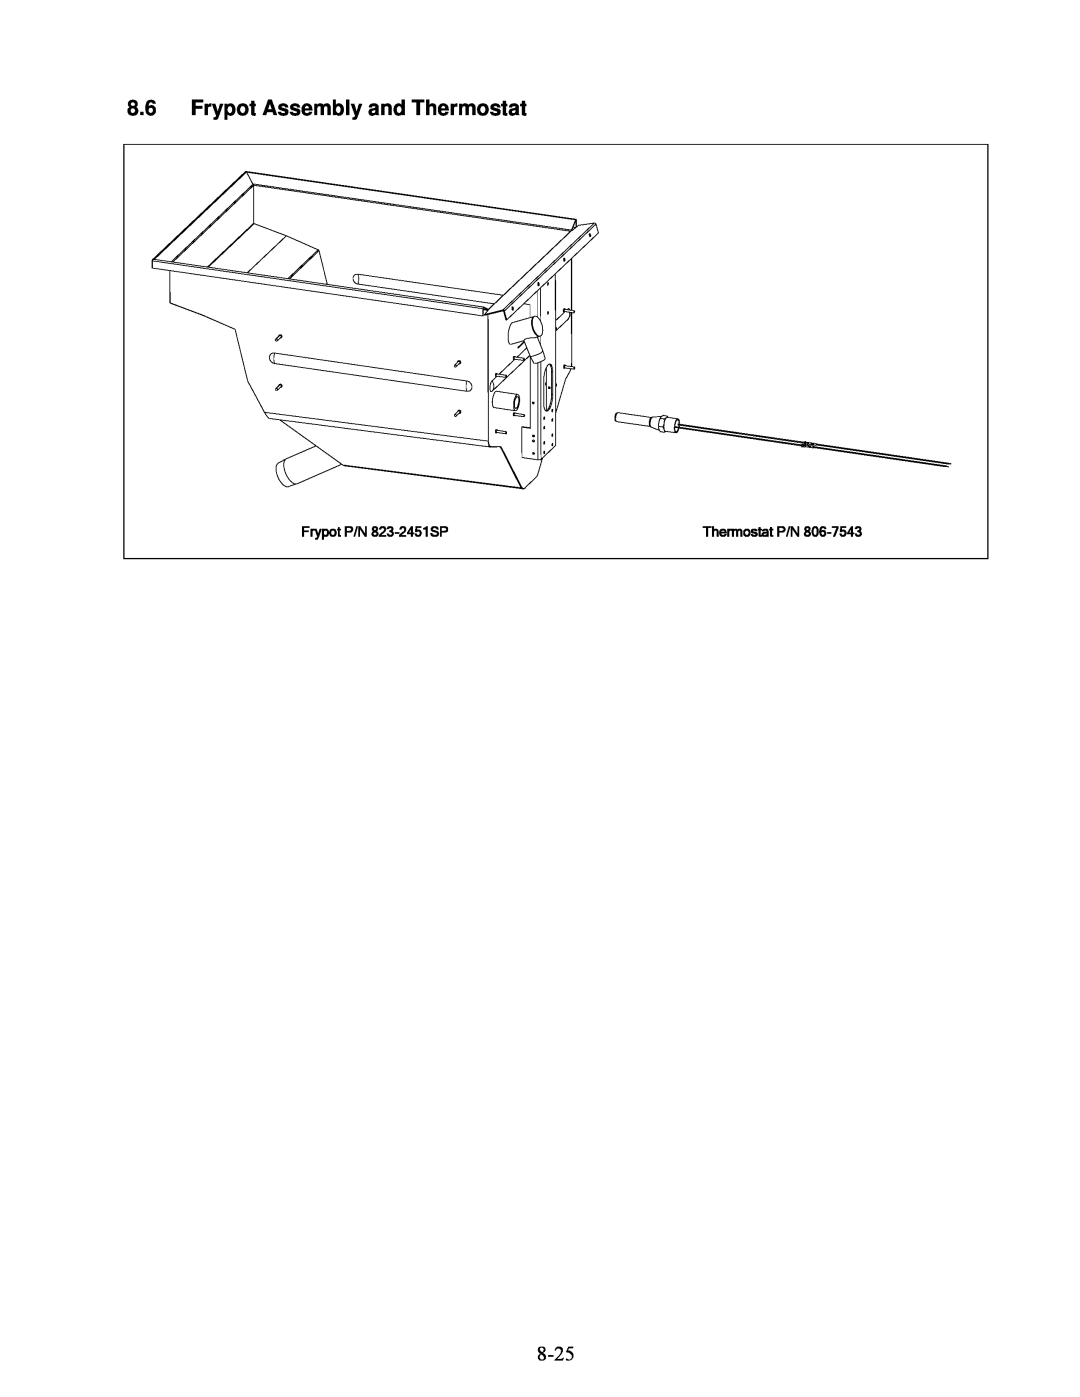 Frymaster H22SC, H17SC, H14SC manual Frypot Assembly and Thermostat, Frypot P/N 823-2451SP, Thermostat P/N 